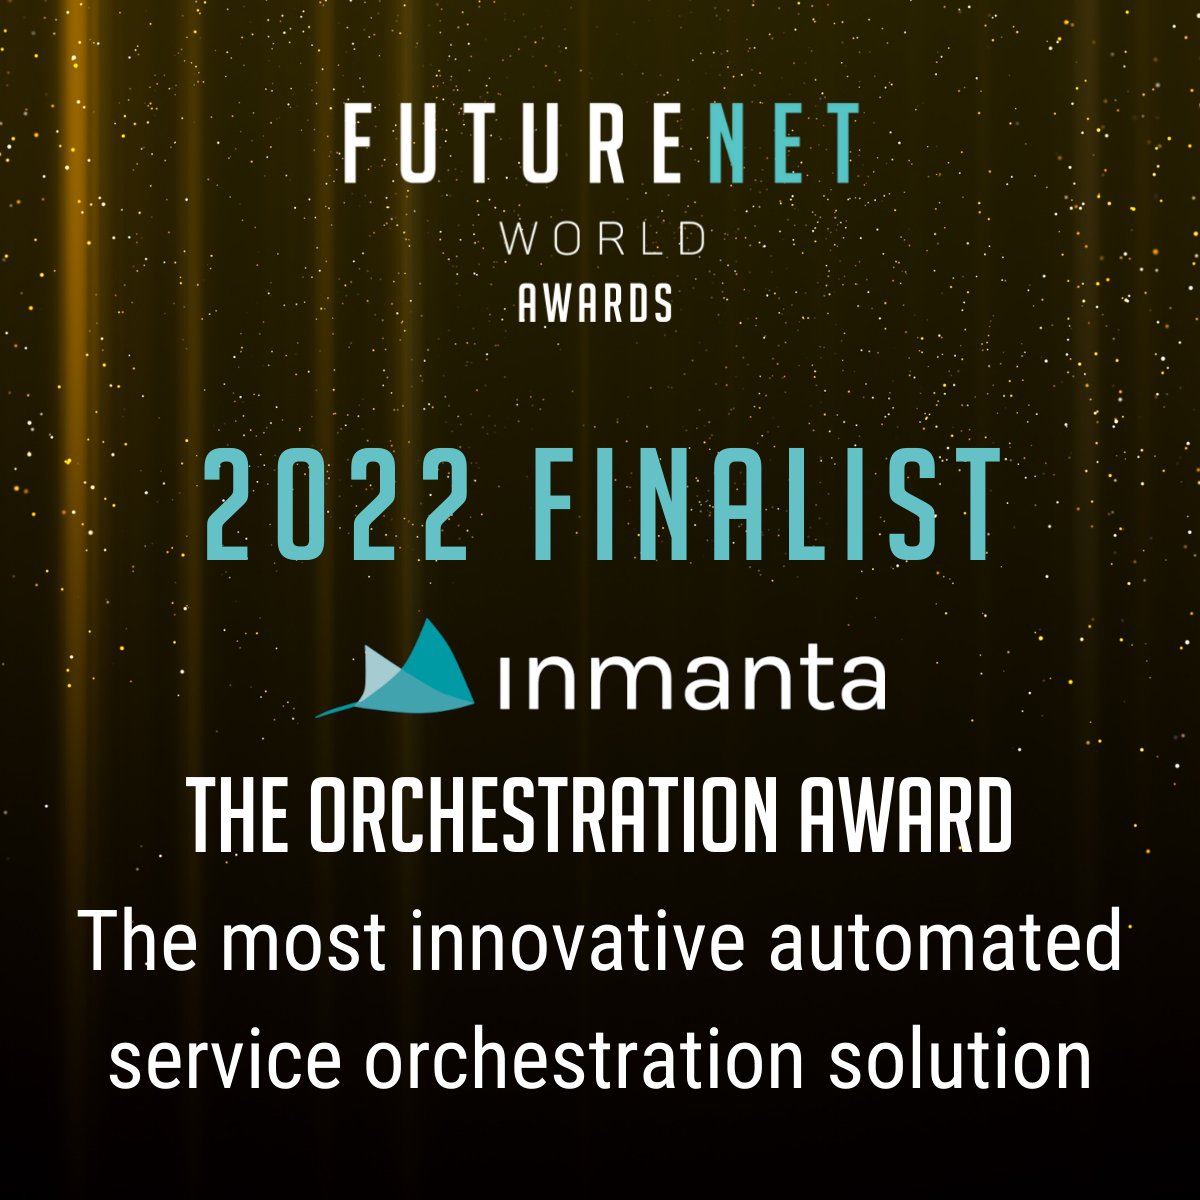 Delighted to be nominated as a finalist for the #FutureNetWorld #Orchestration #Award - The most innovative automated service orchestration solution!
Check out all shortlist winners on the awards web page: futurenetworld.net/events/futuren… @FuturenetW